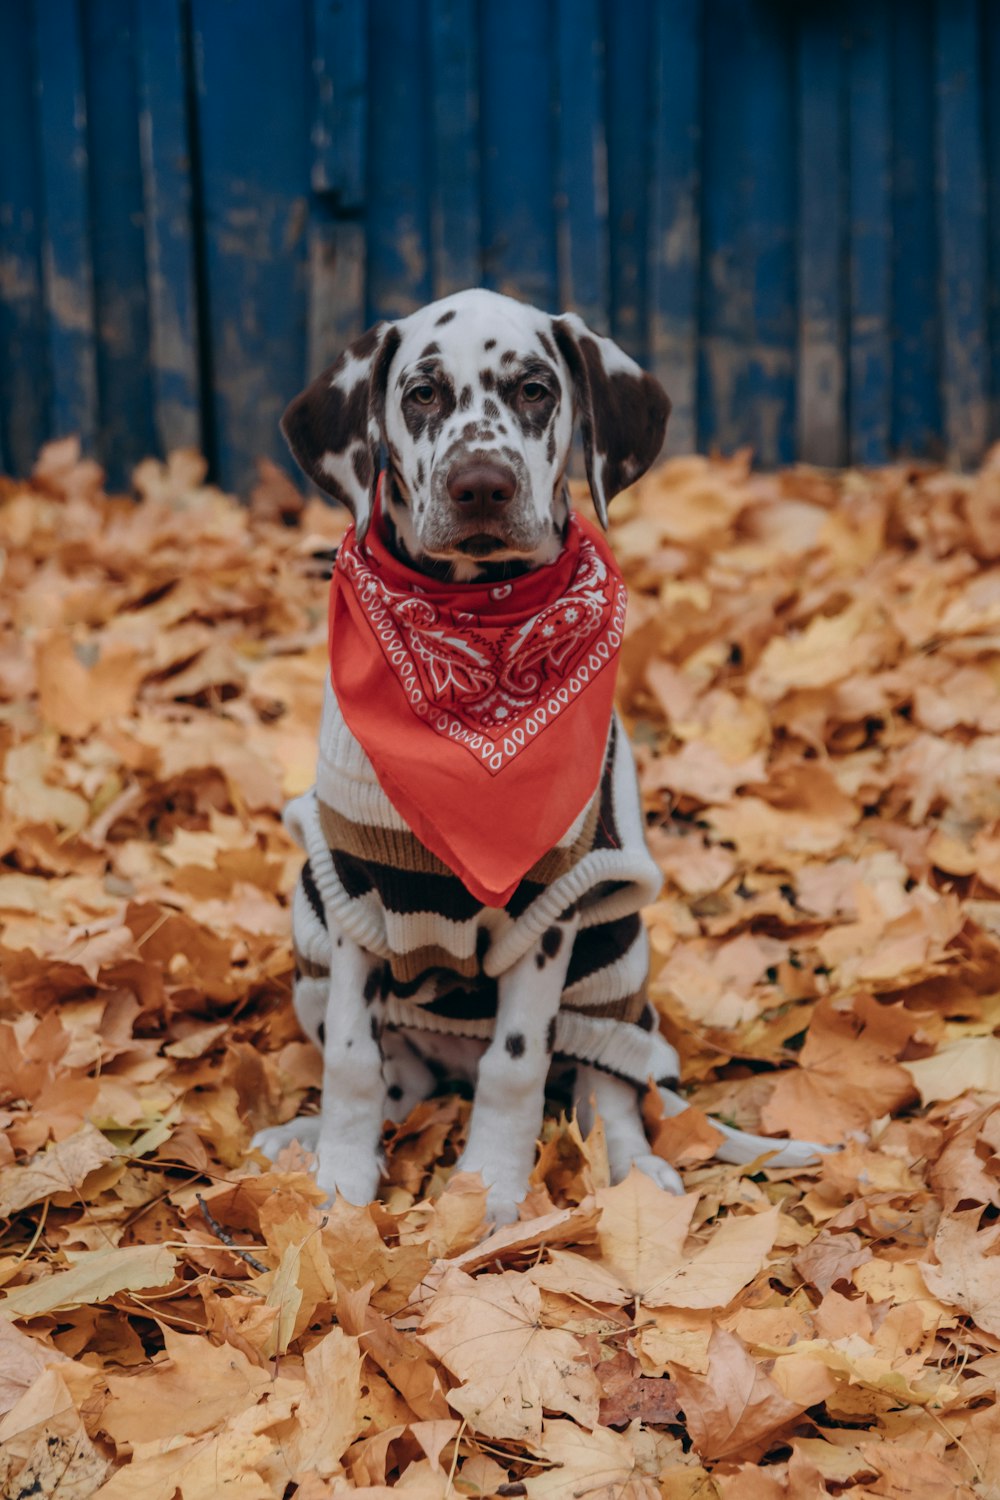 black and white dalmatian dog wearing red and white shirt sitting on dried leaves during daytime